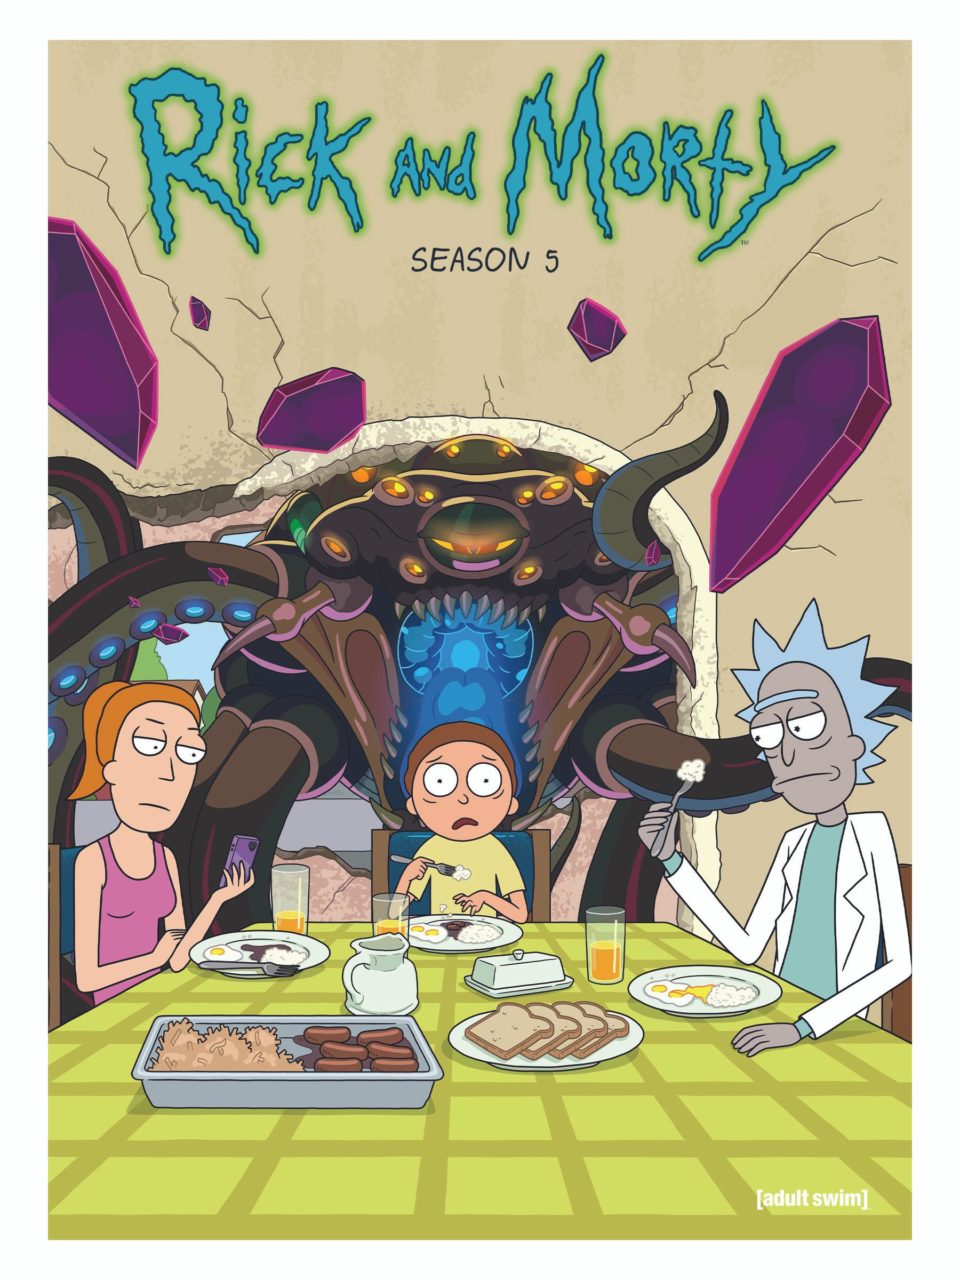 Rick And Morty: The Complete Fifth Season DVD cover (Warner Bros. Home Entertainment)